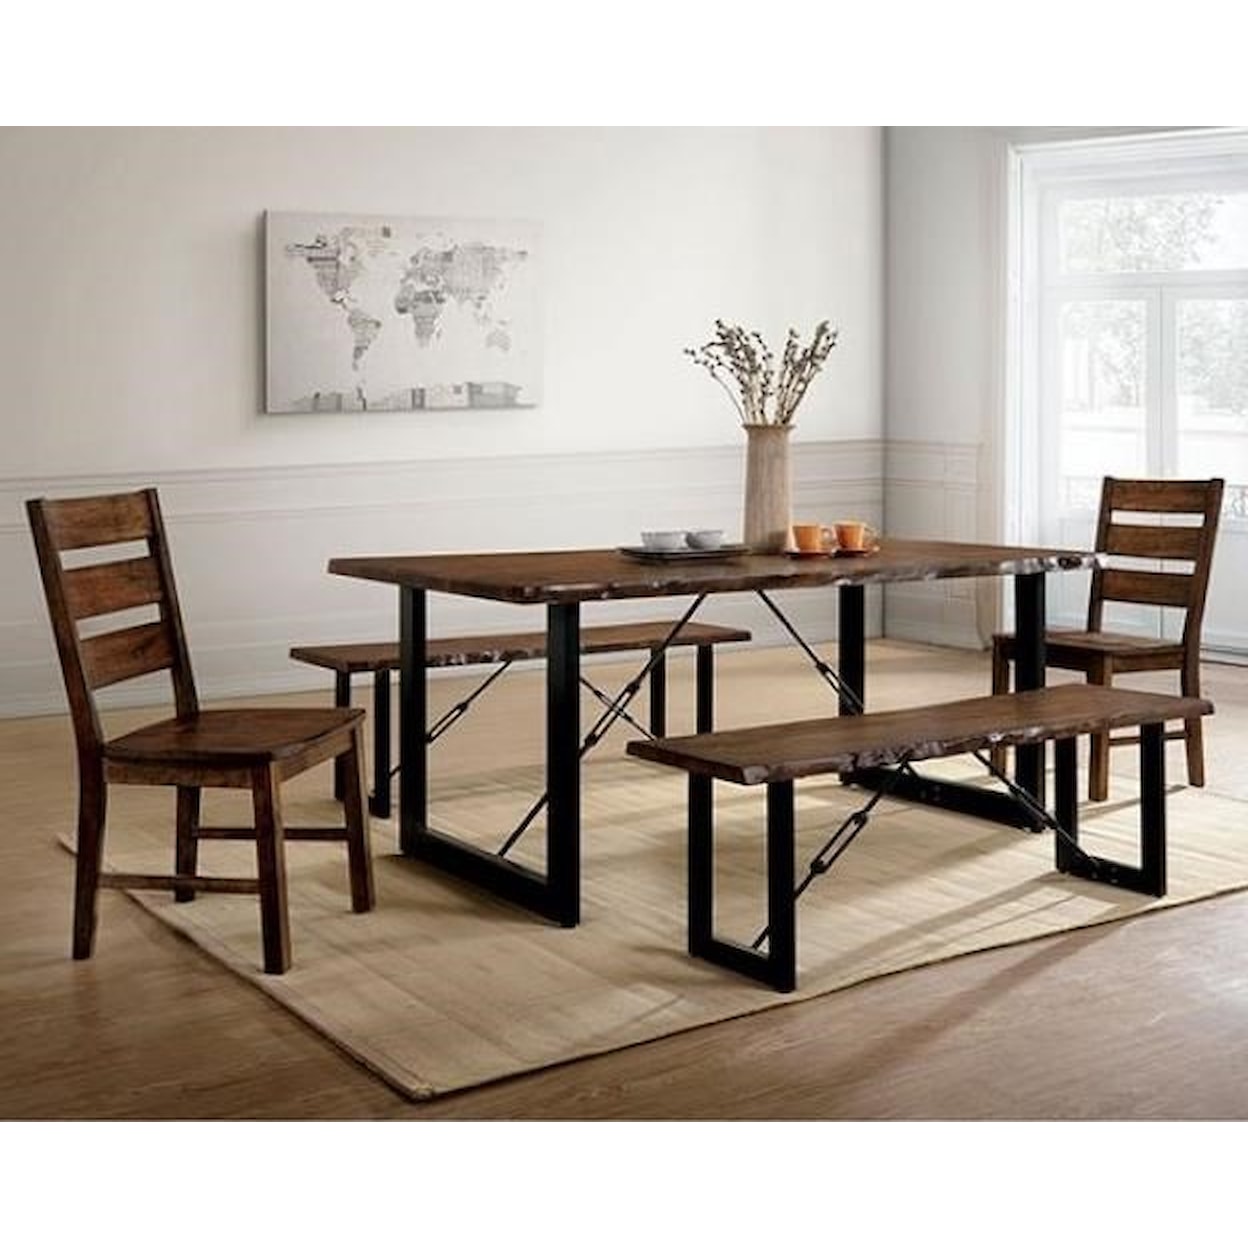 Furniture of America Dulce Table and Chair Set with Bench